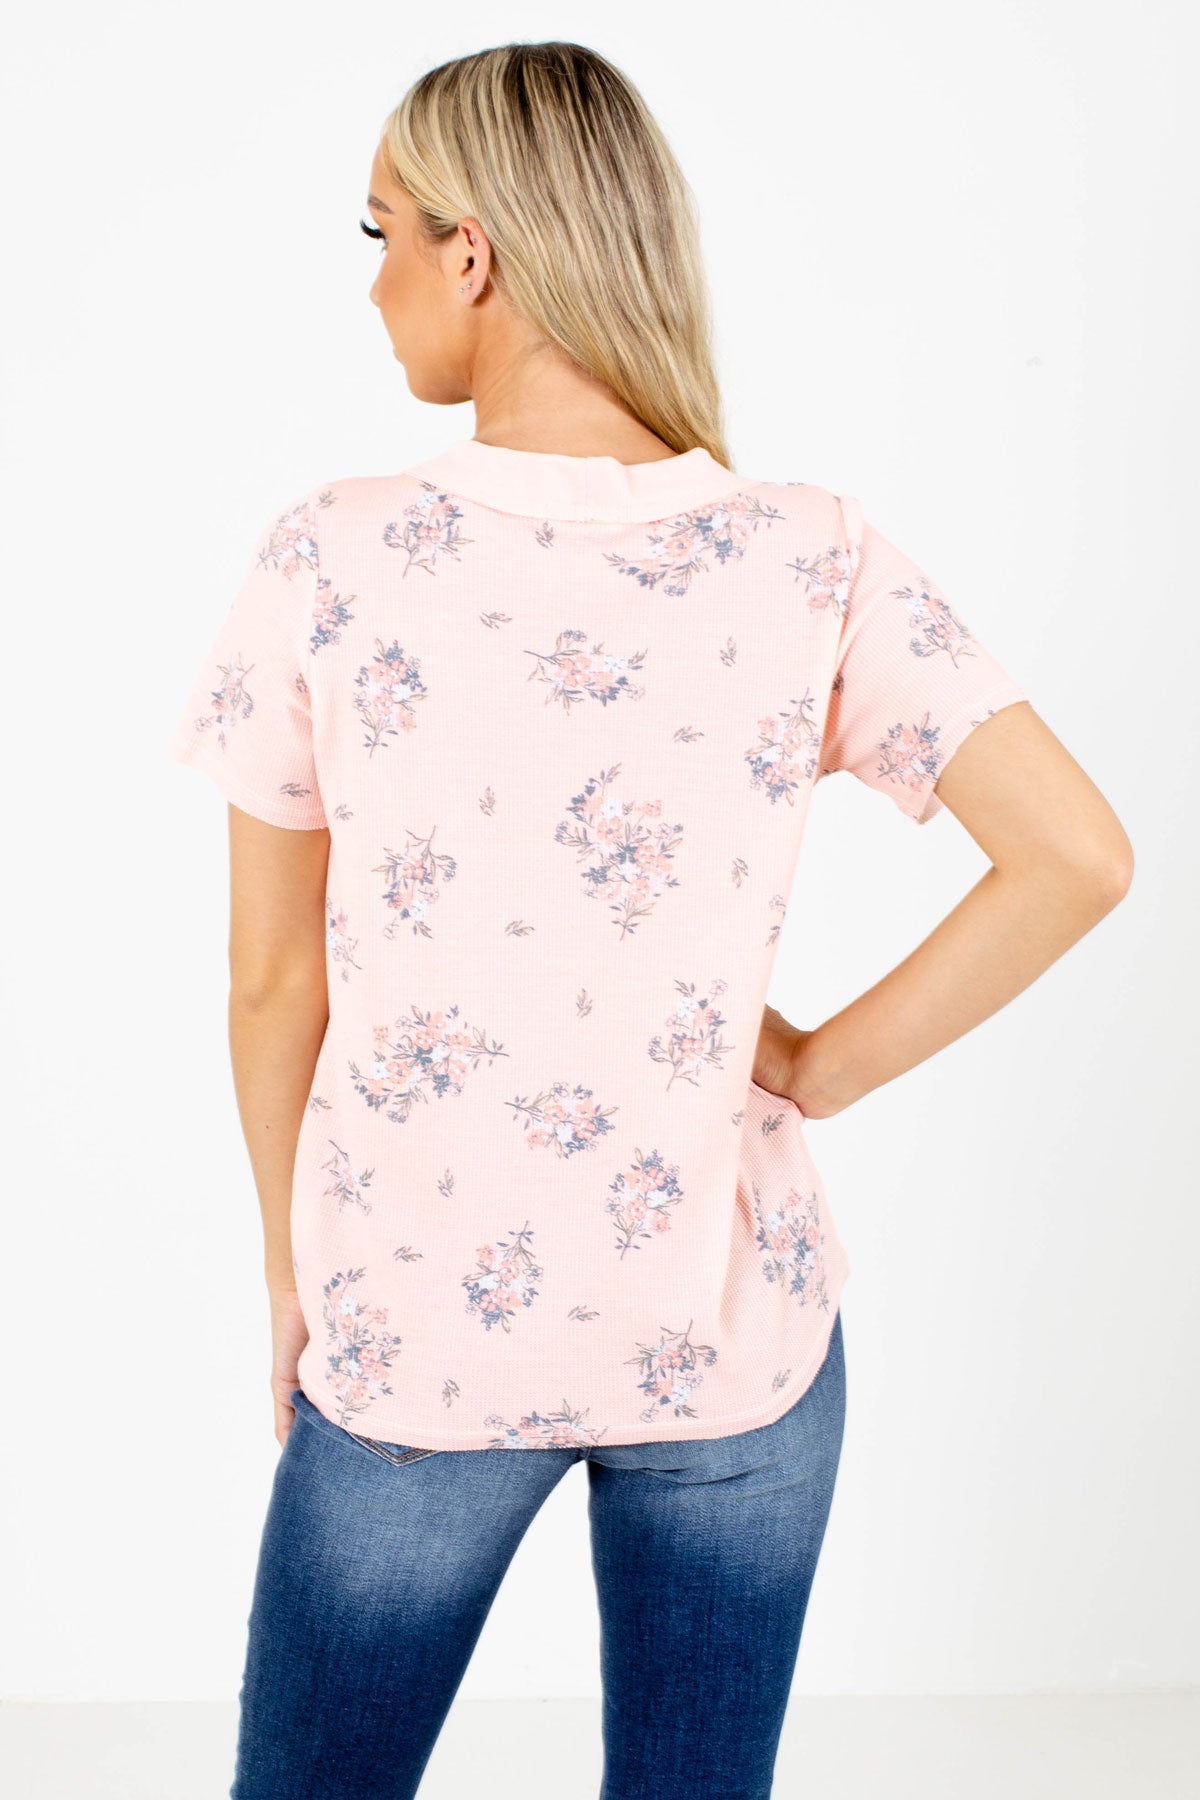 Ode to Love Floral Top